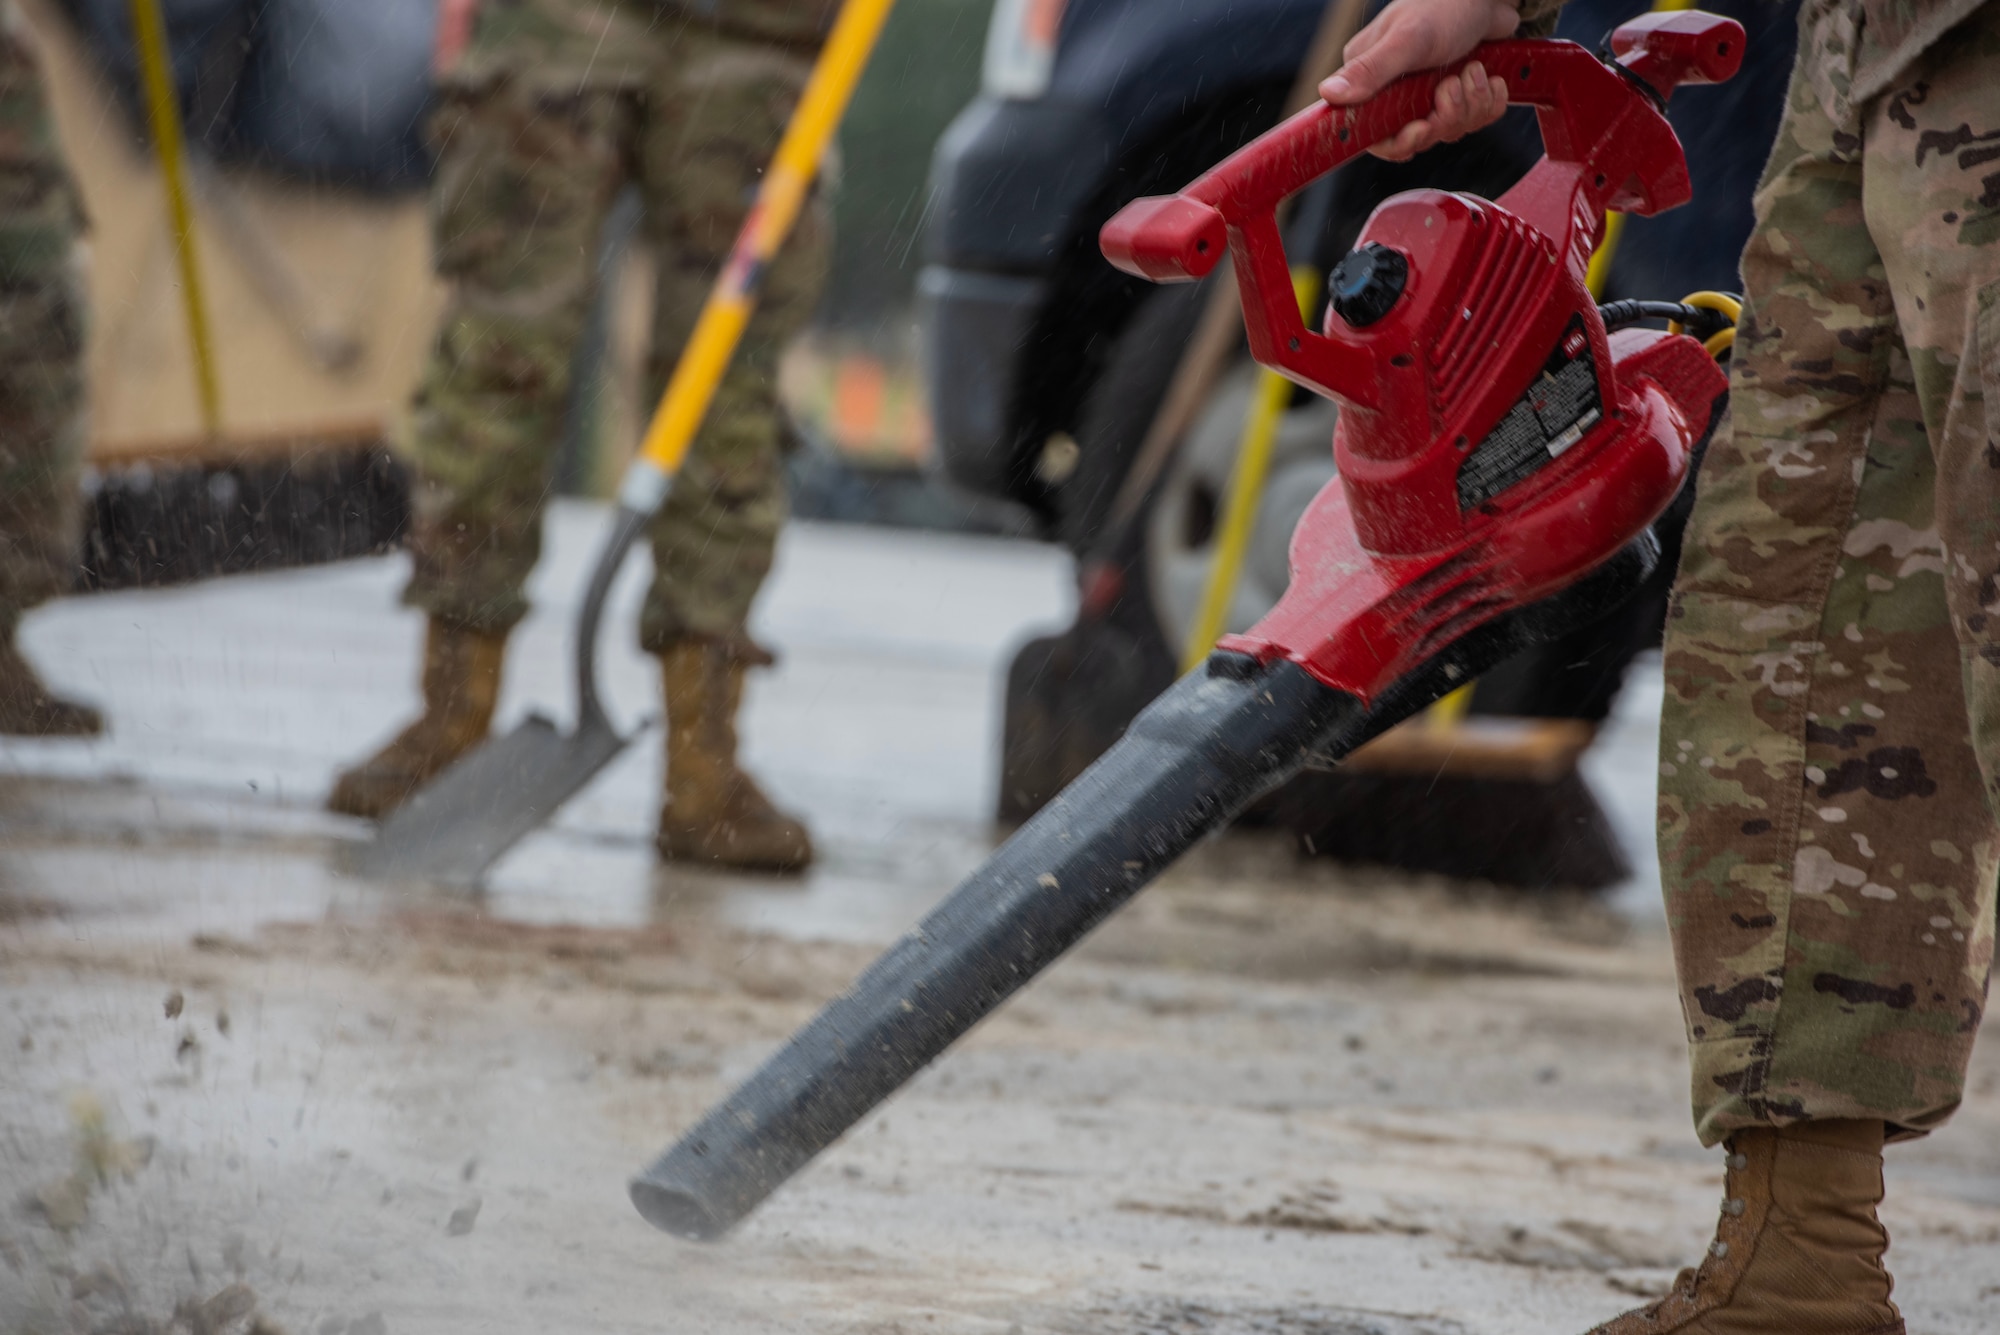 Airman uses a red leaf blower